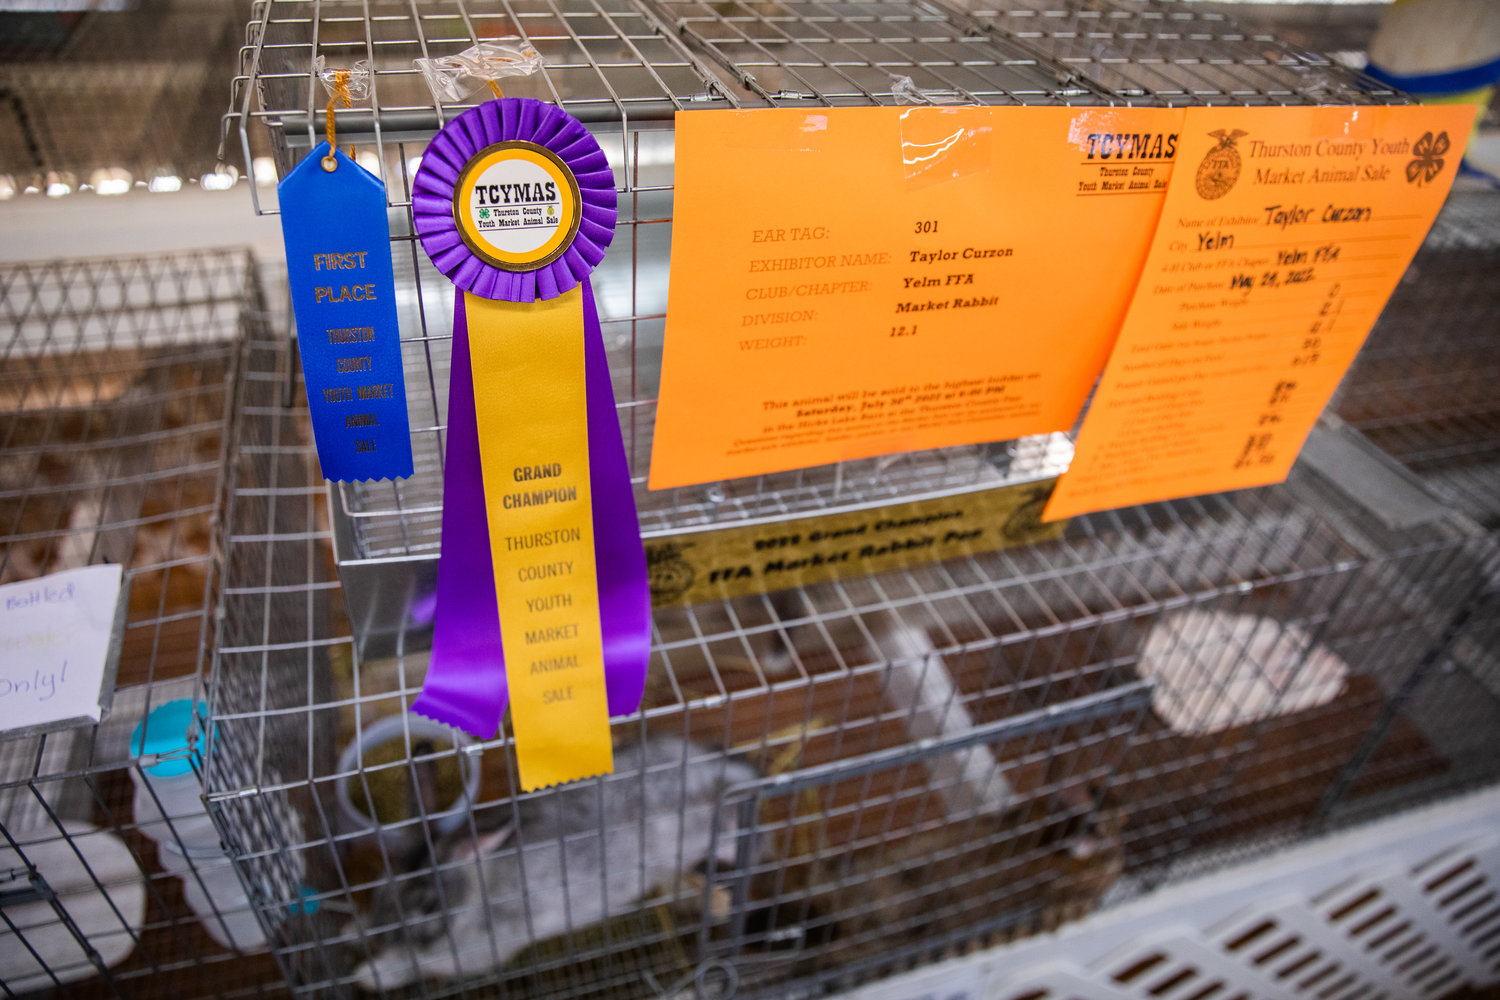 Taylor Curzon, of Yelm, displays First Place and Grand Champion ribbons for rabbits in the Thurston County Youth Market Animal Sale Thursday in Lacey.